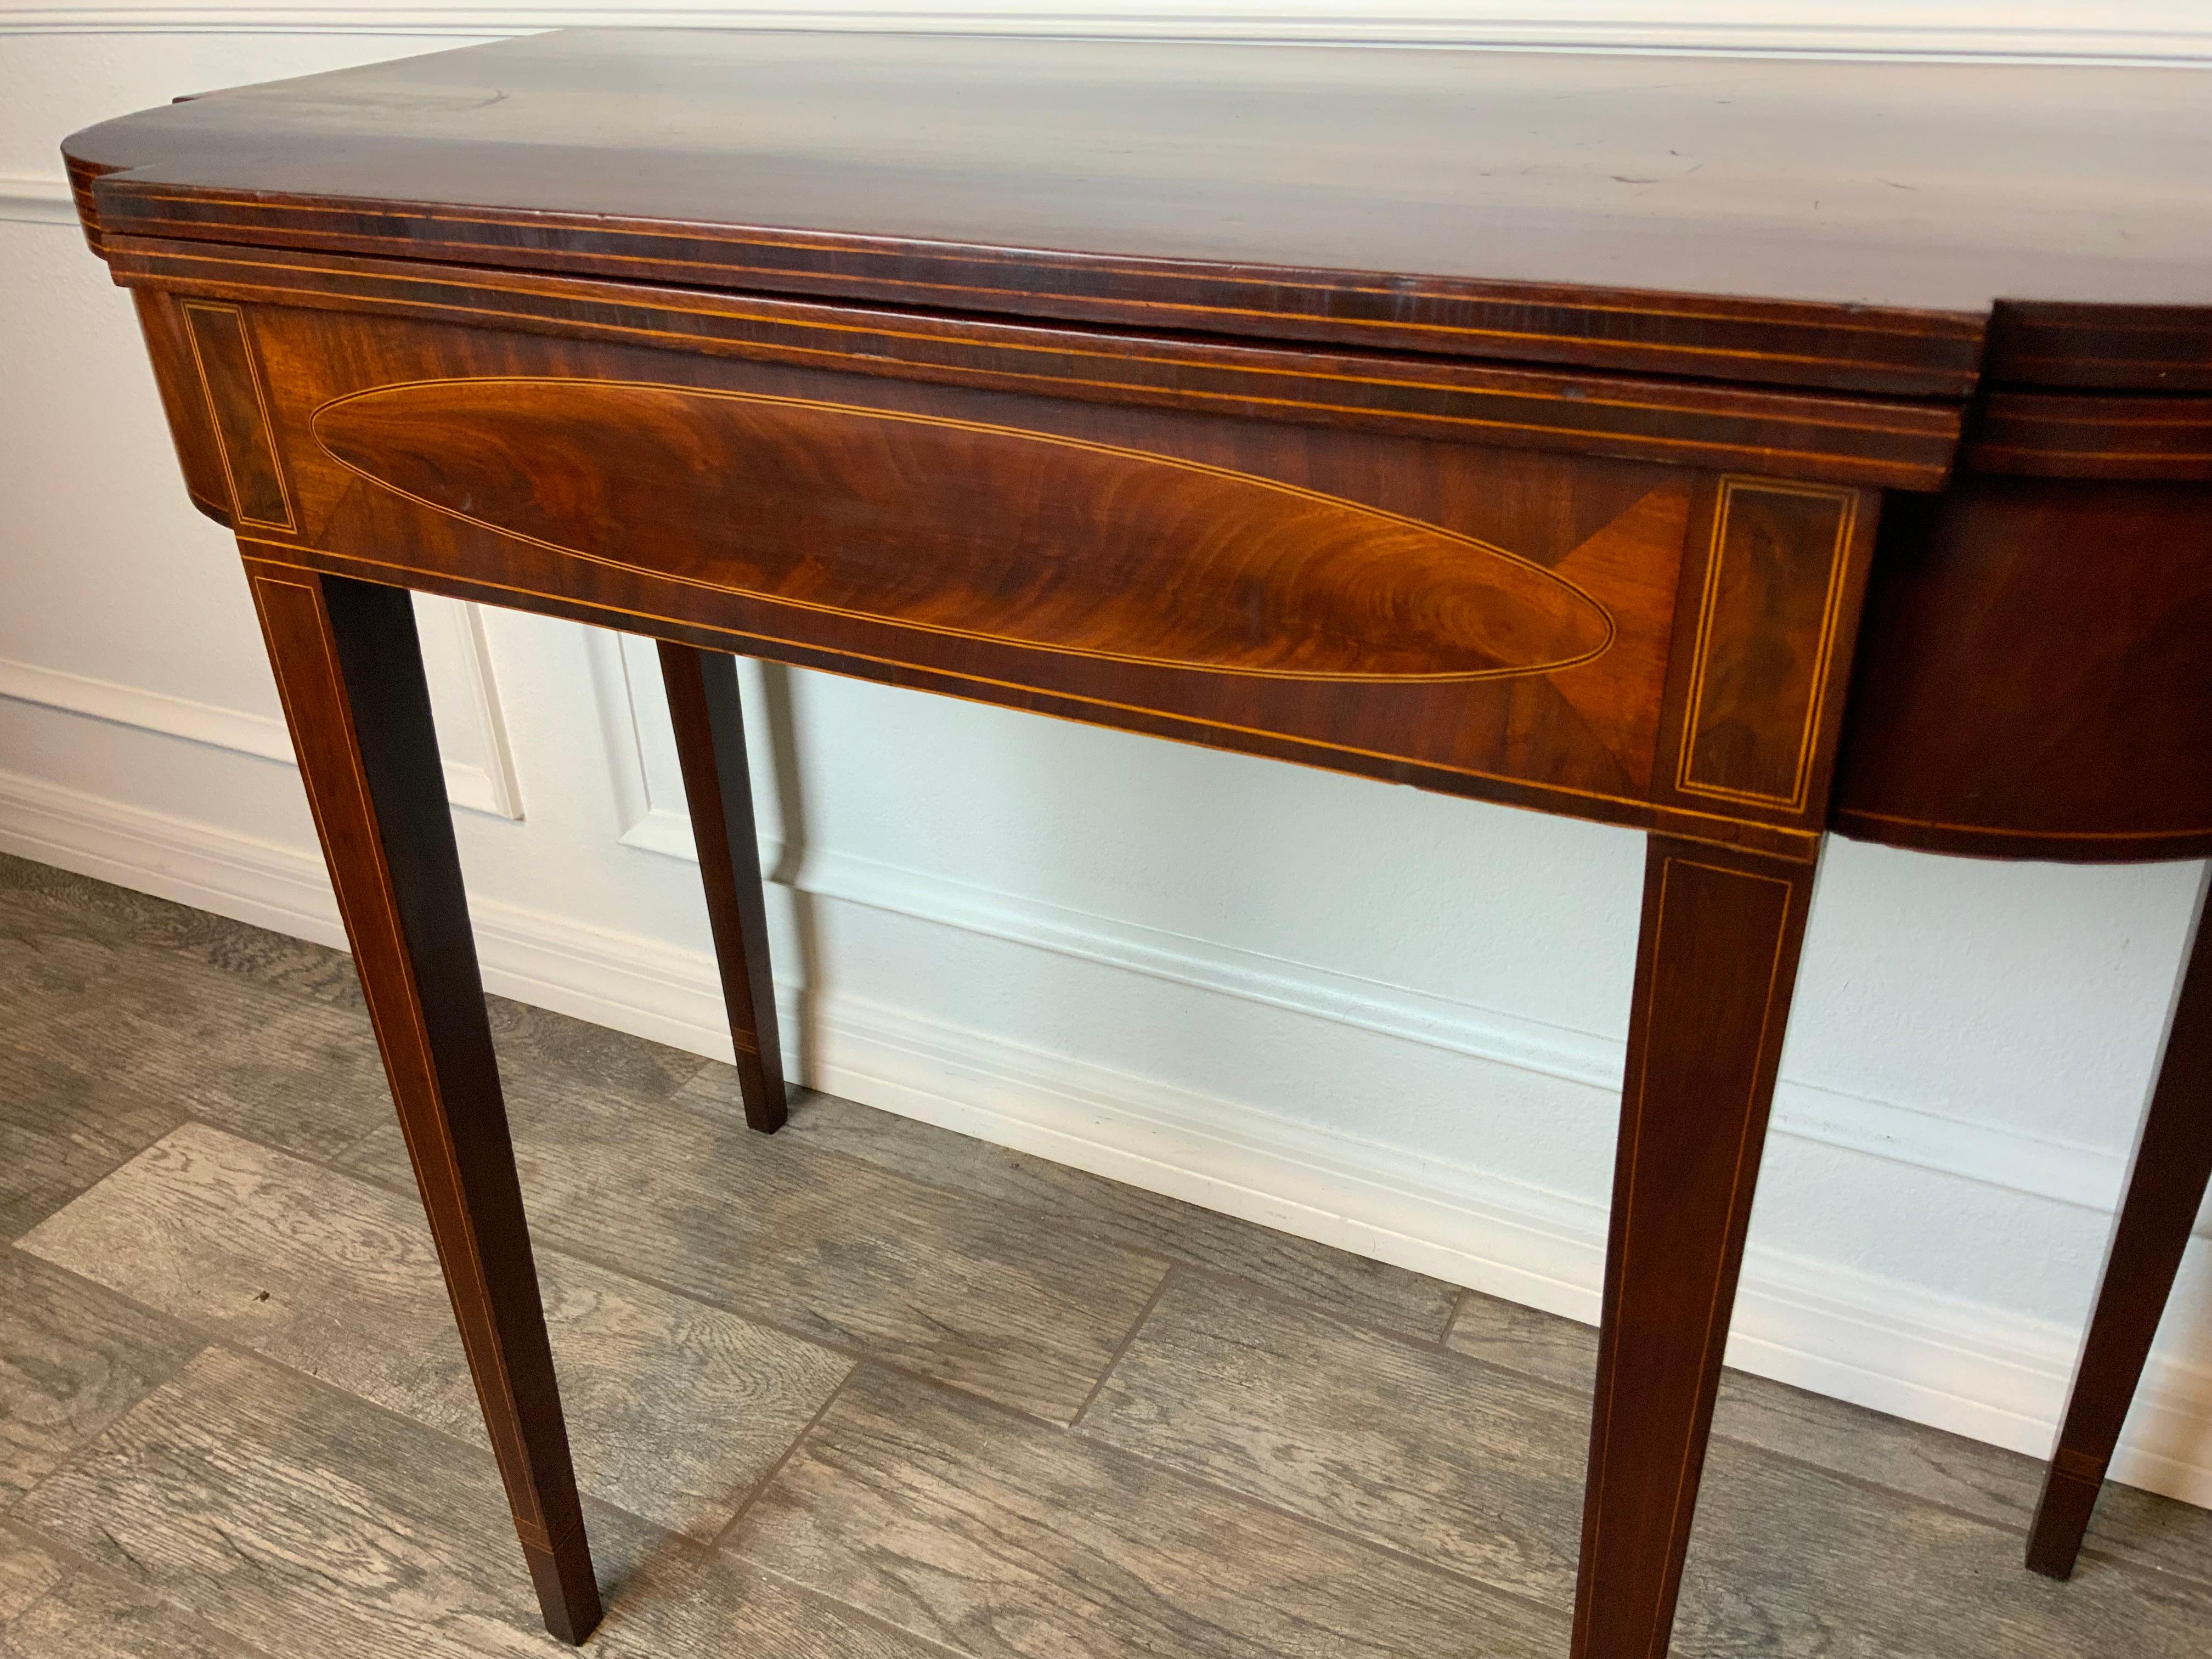 American mahogany inlaid Hepplewhite fold top card table Circa 1790-1800. Tapered straight legs terminating at the feet in simple cuff inlay. Shaped skirt and conforming ovolo shaped corner tops with double string inlay. White Pine and Ash secondary